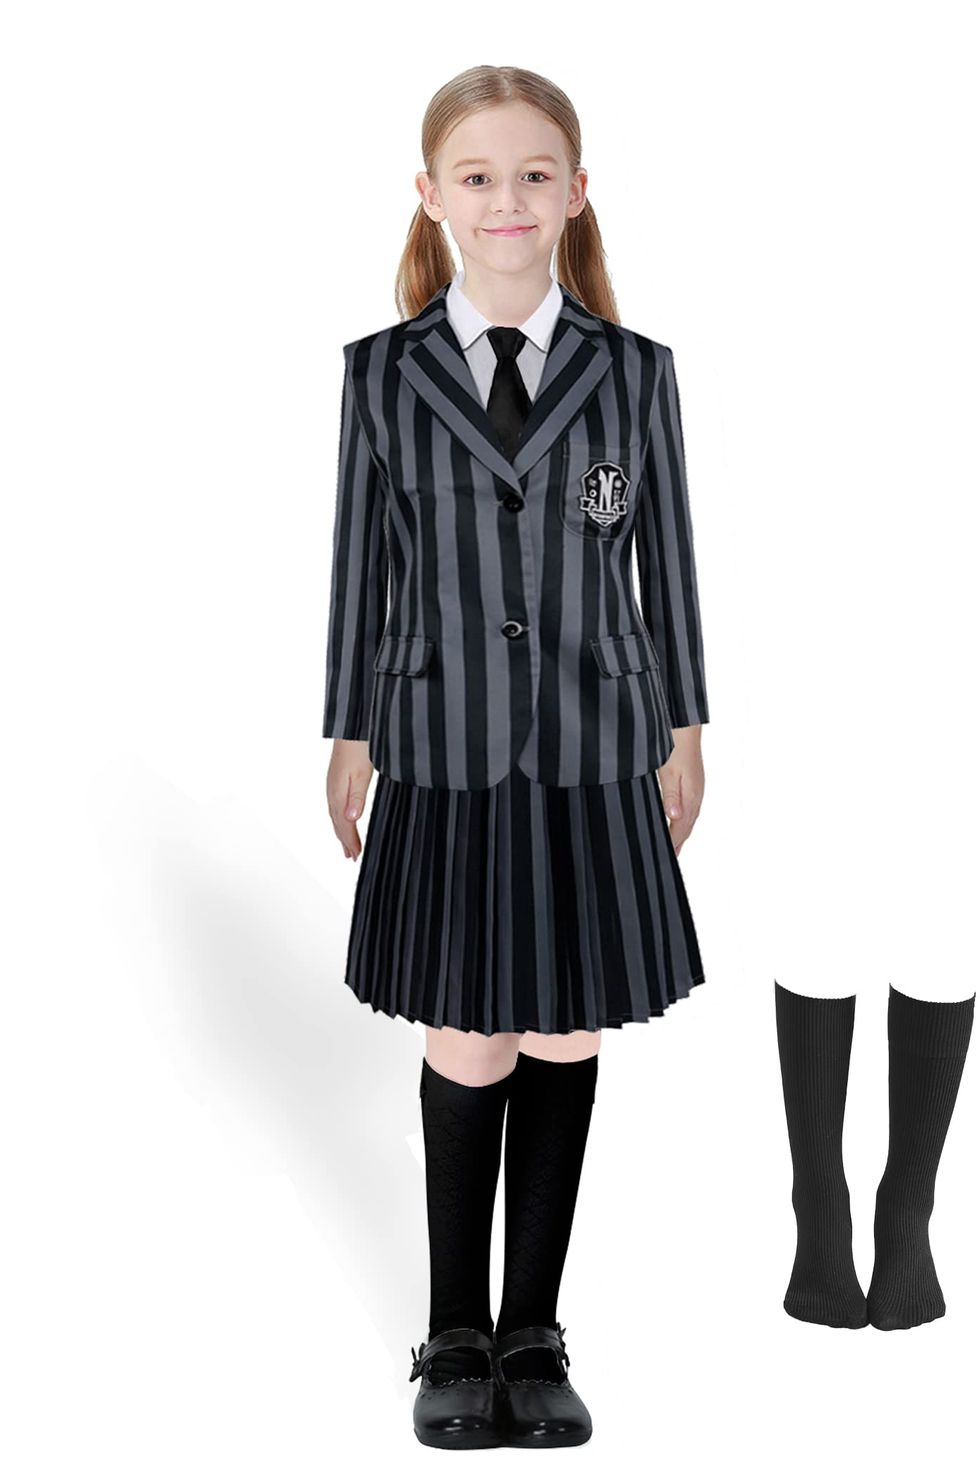  Avady Wednesday Addams Costume Girls Black Wednesday Addams  Dress Halloween Cosplay Party Dresses With Mask 7-8Y : Clothing, Shoes &  Jewelry